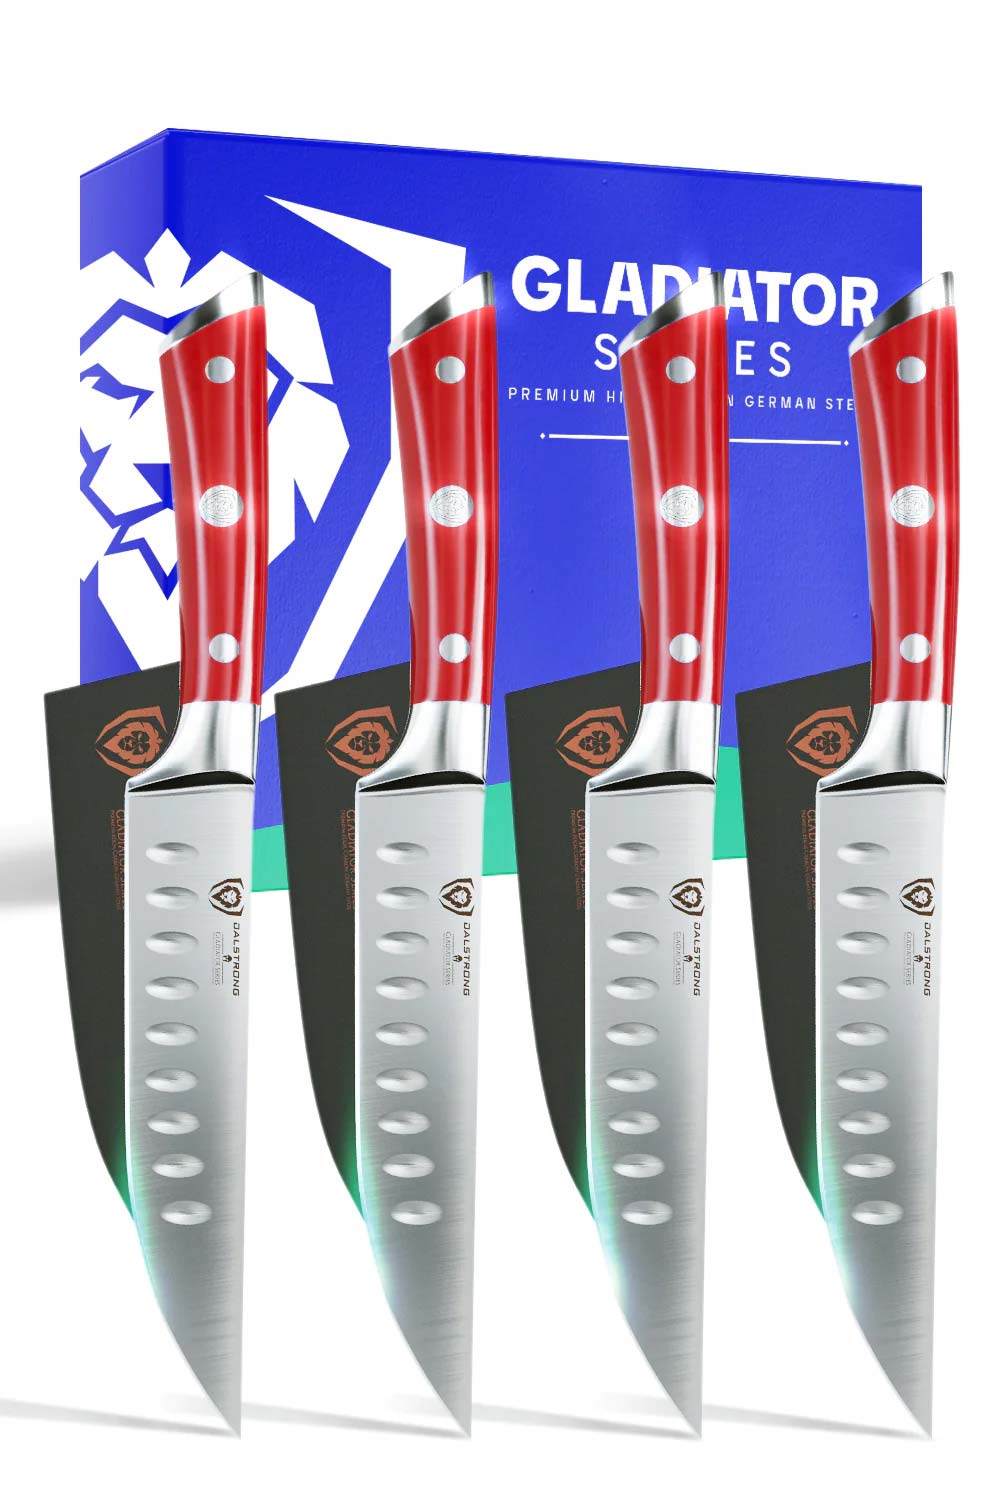 Dalstrong gladiator series 4 piece steak knife set with red handles in front of it's premium packaging.